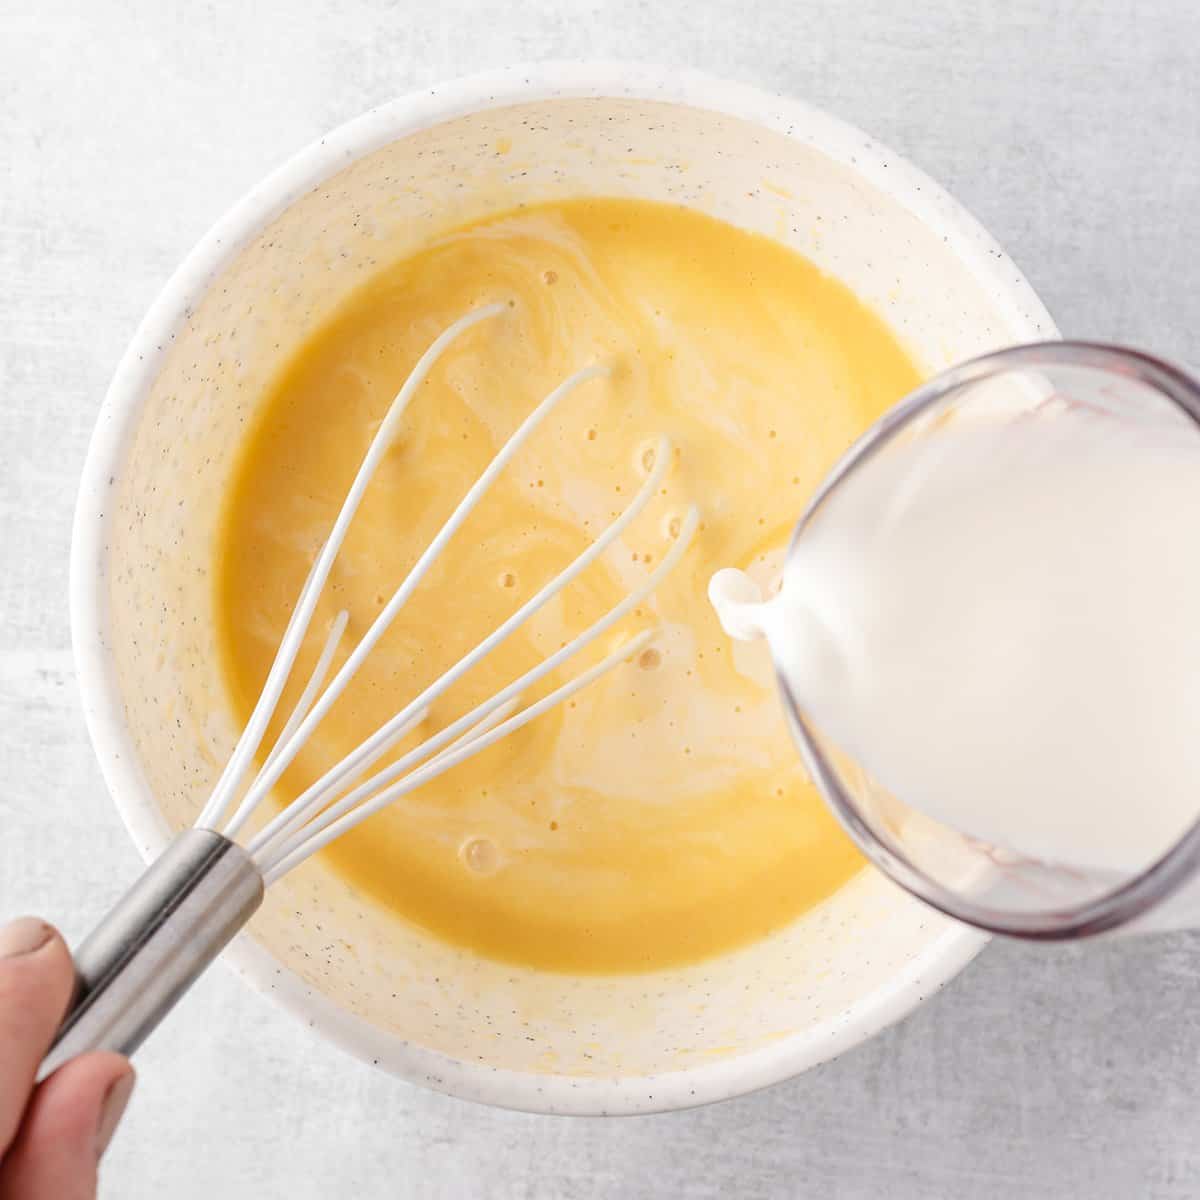 How to Make Pancakes from Scratch - whisking in milk